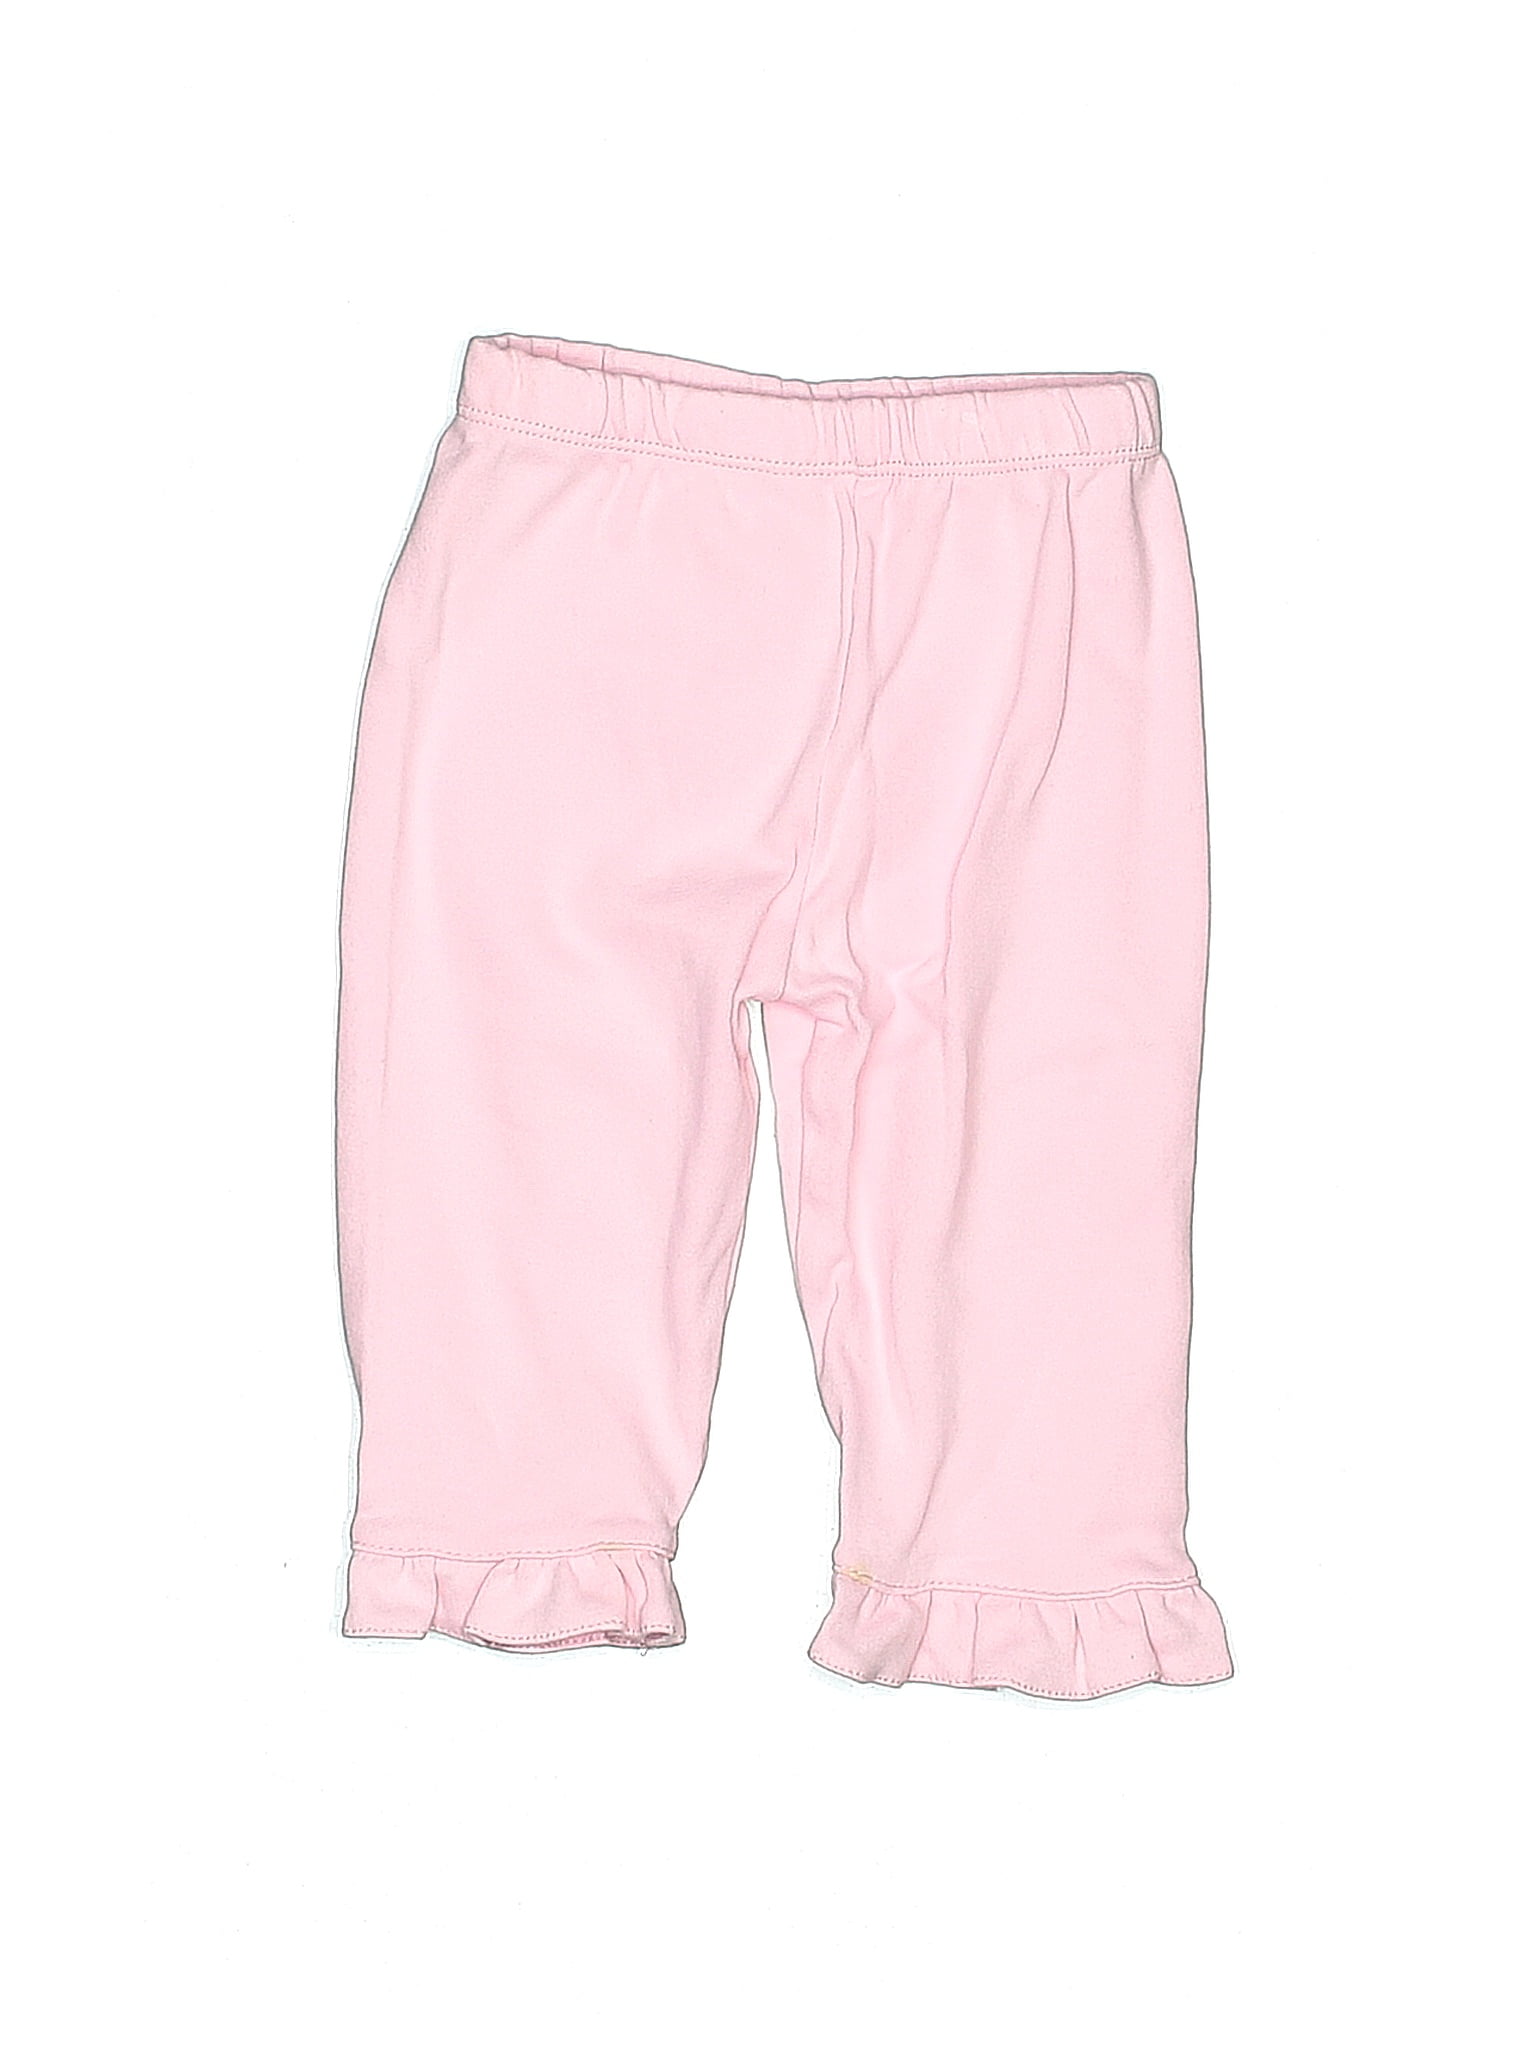 Terez Solid Pink Leggings Size X-Small (Kids) - 55% off